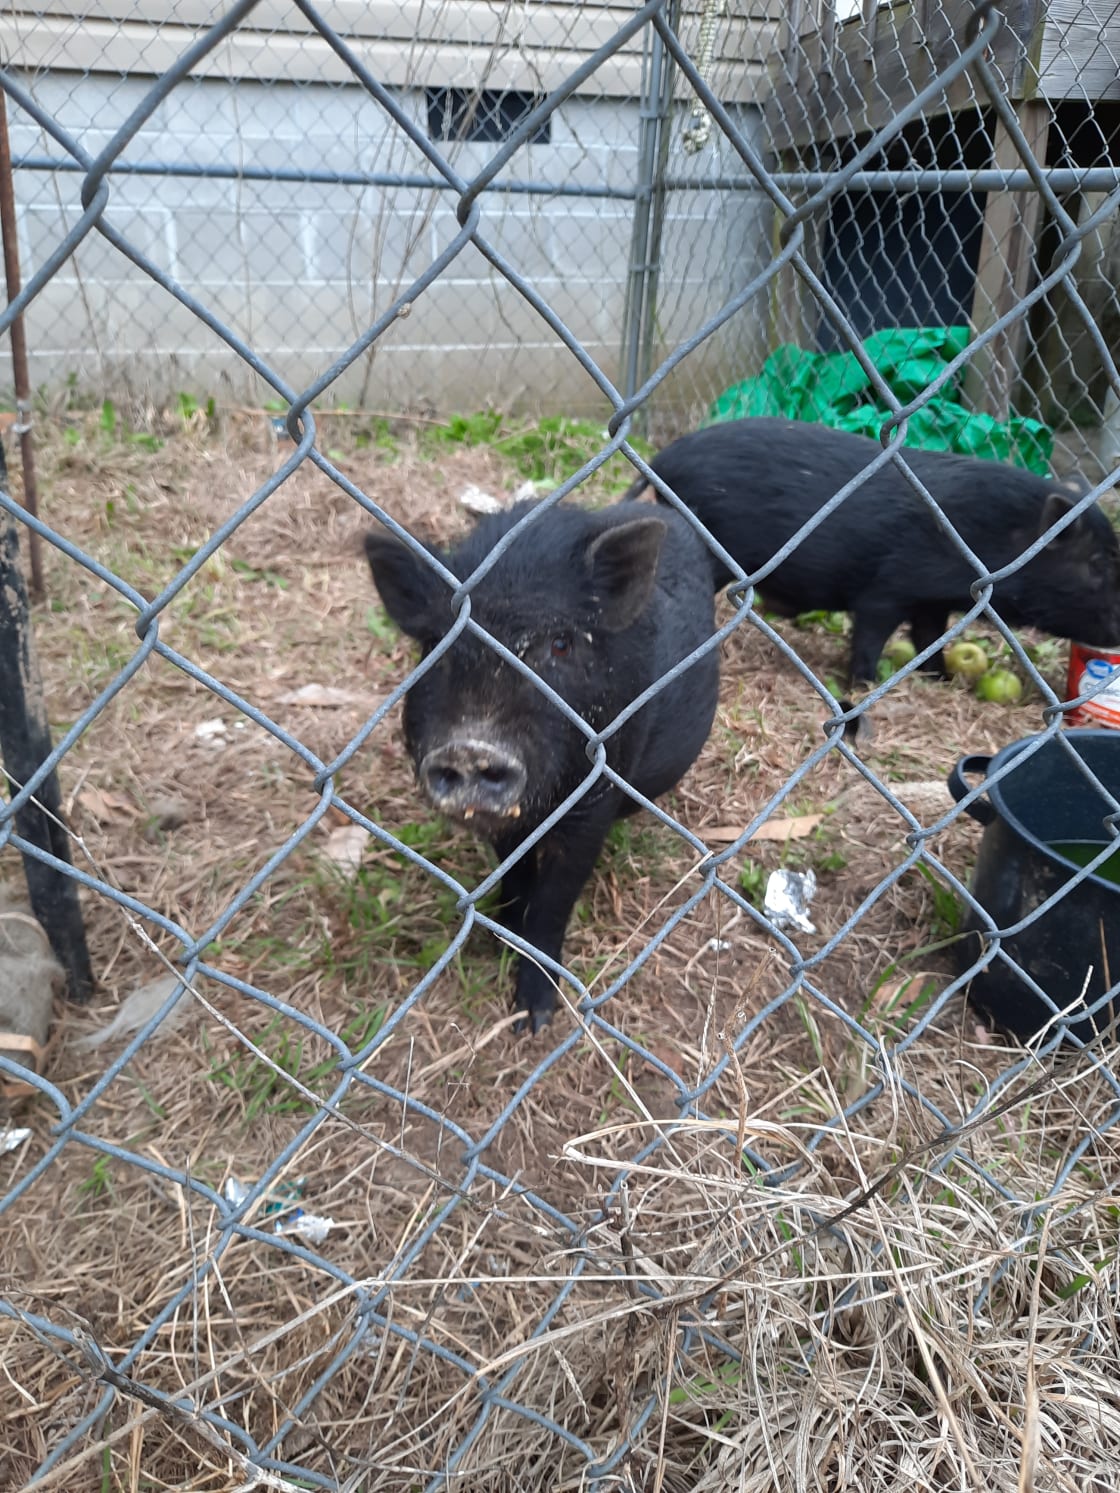 The pot belly pigs say, come feed me!